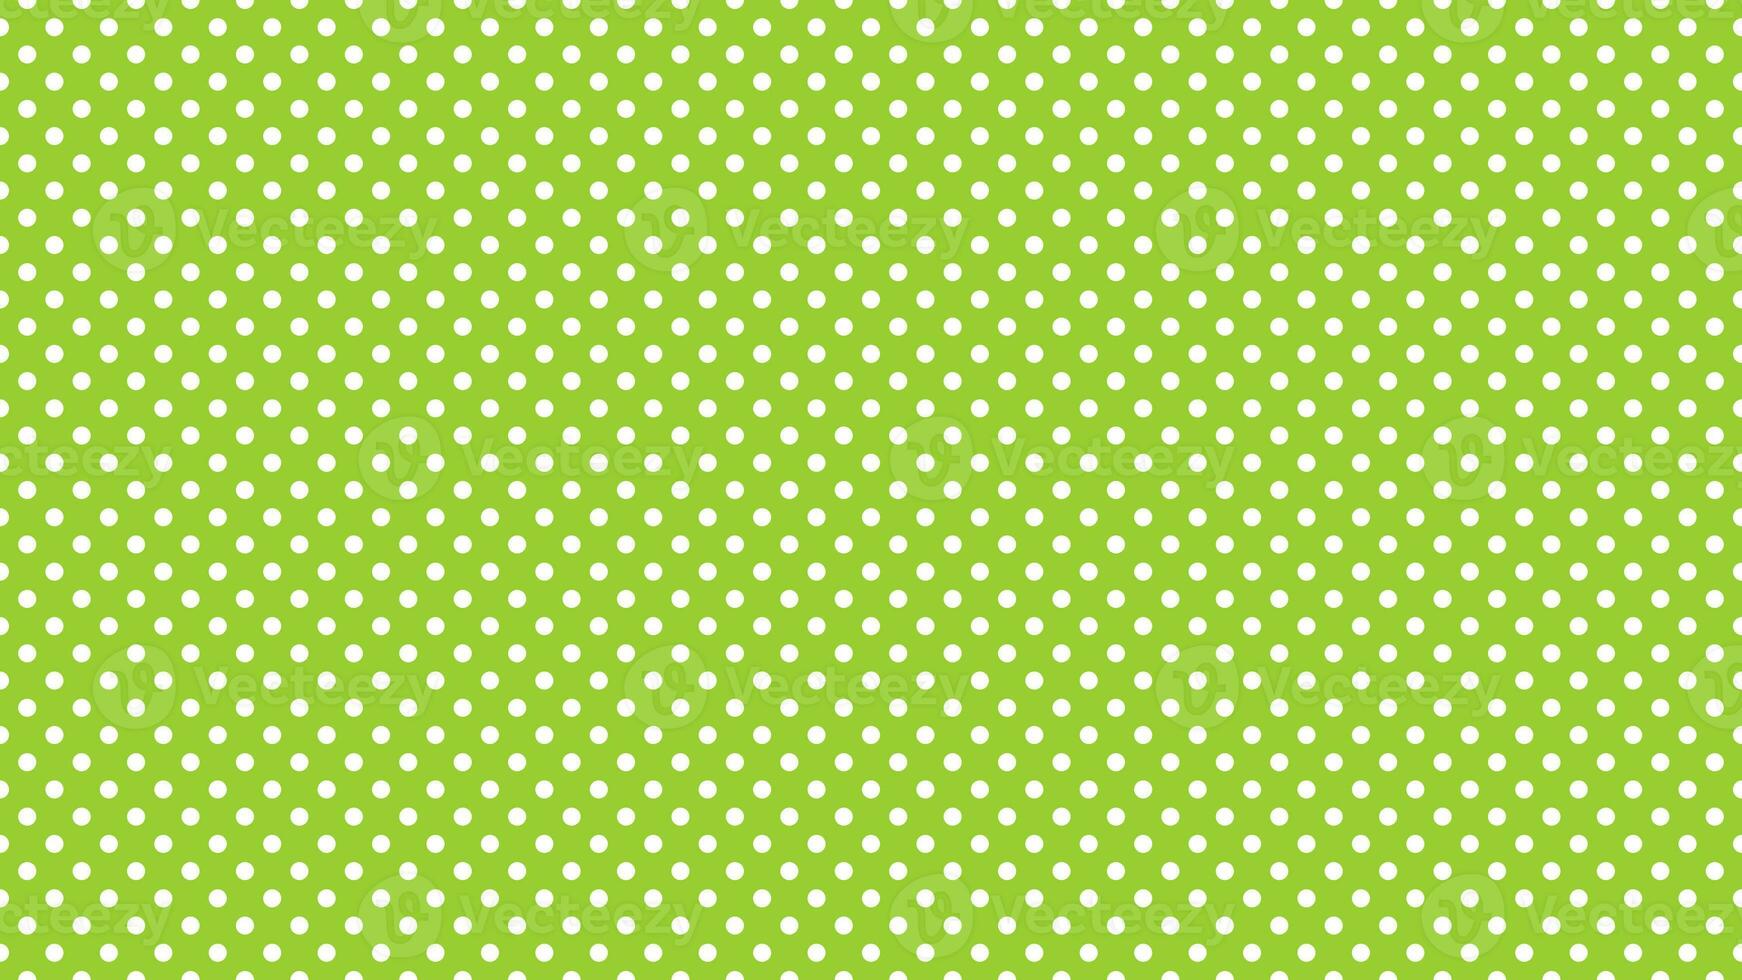 white polka dots over yellow green background photo